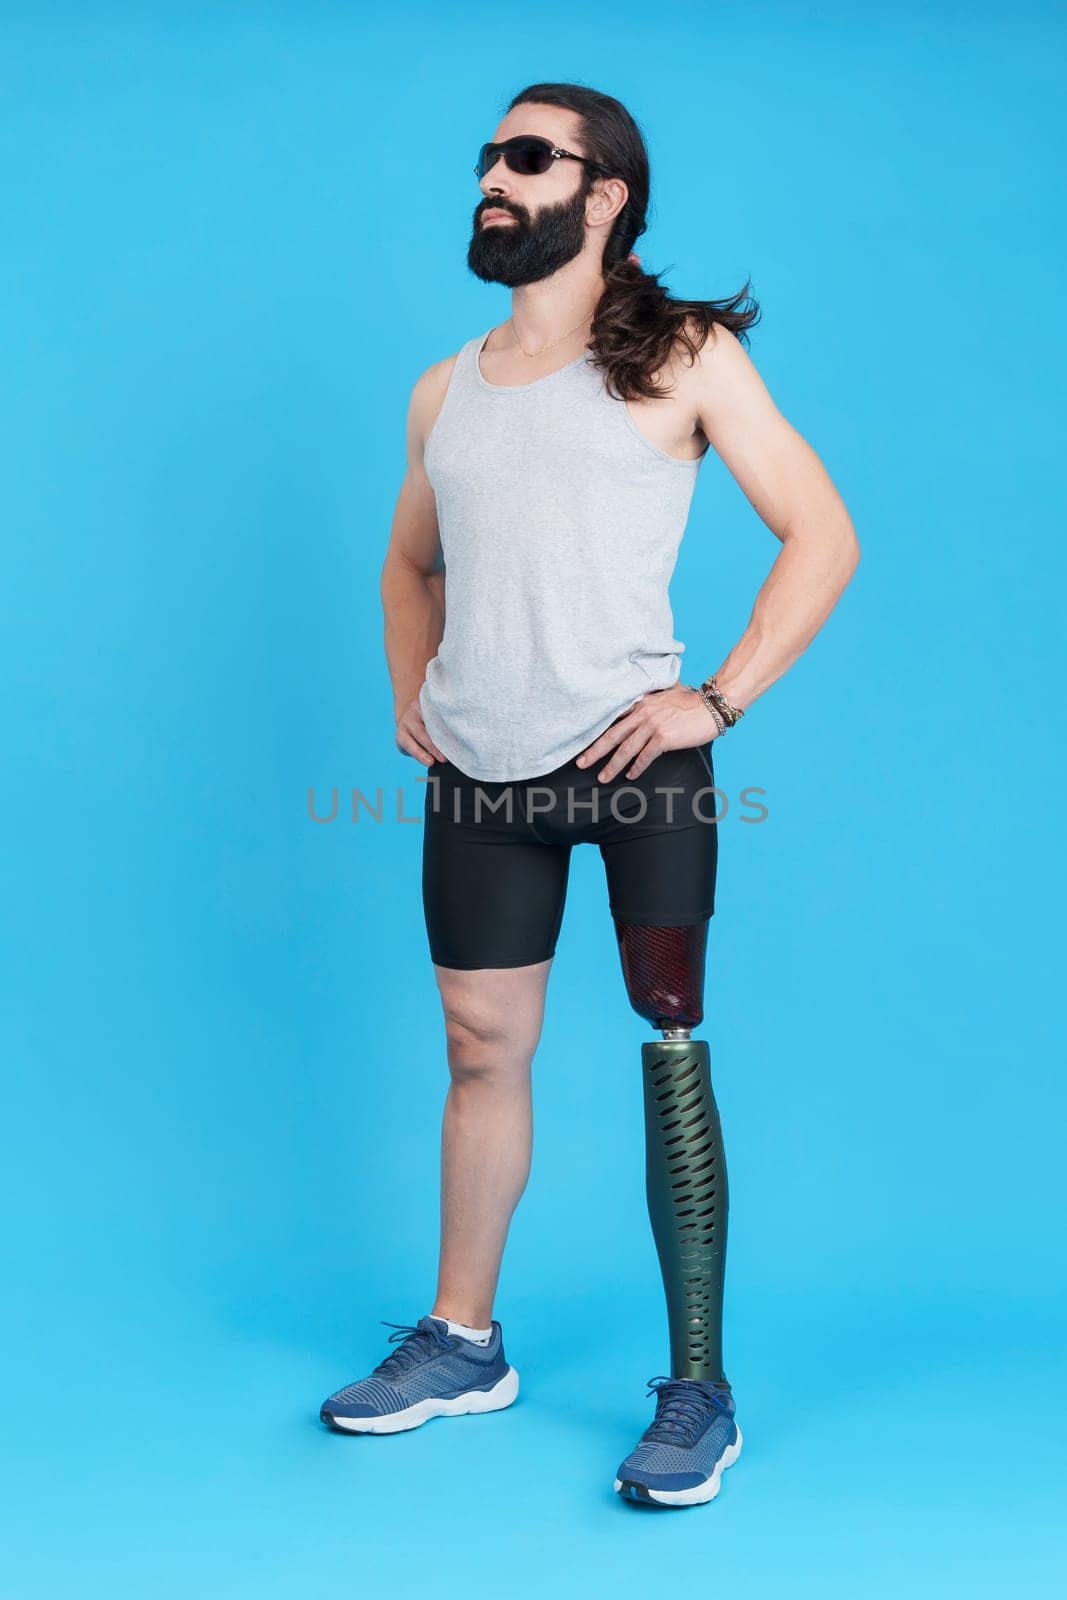 Vertical studio portrait with blue background of a cool man with sunglasses and a prosthesis in the leg